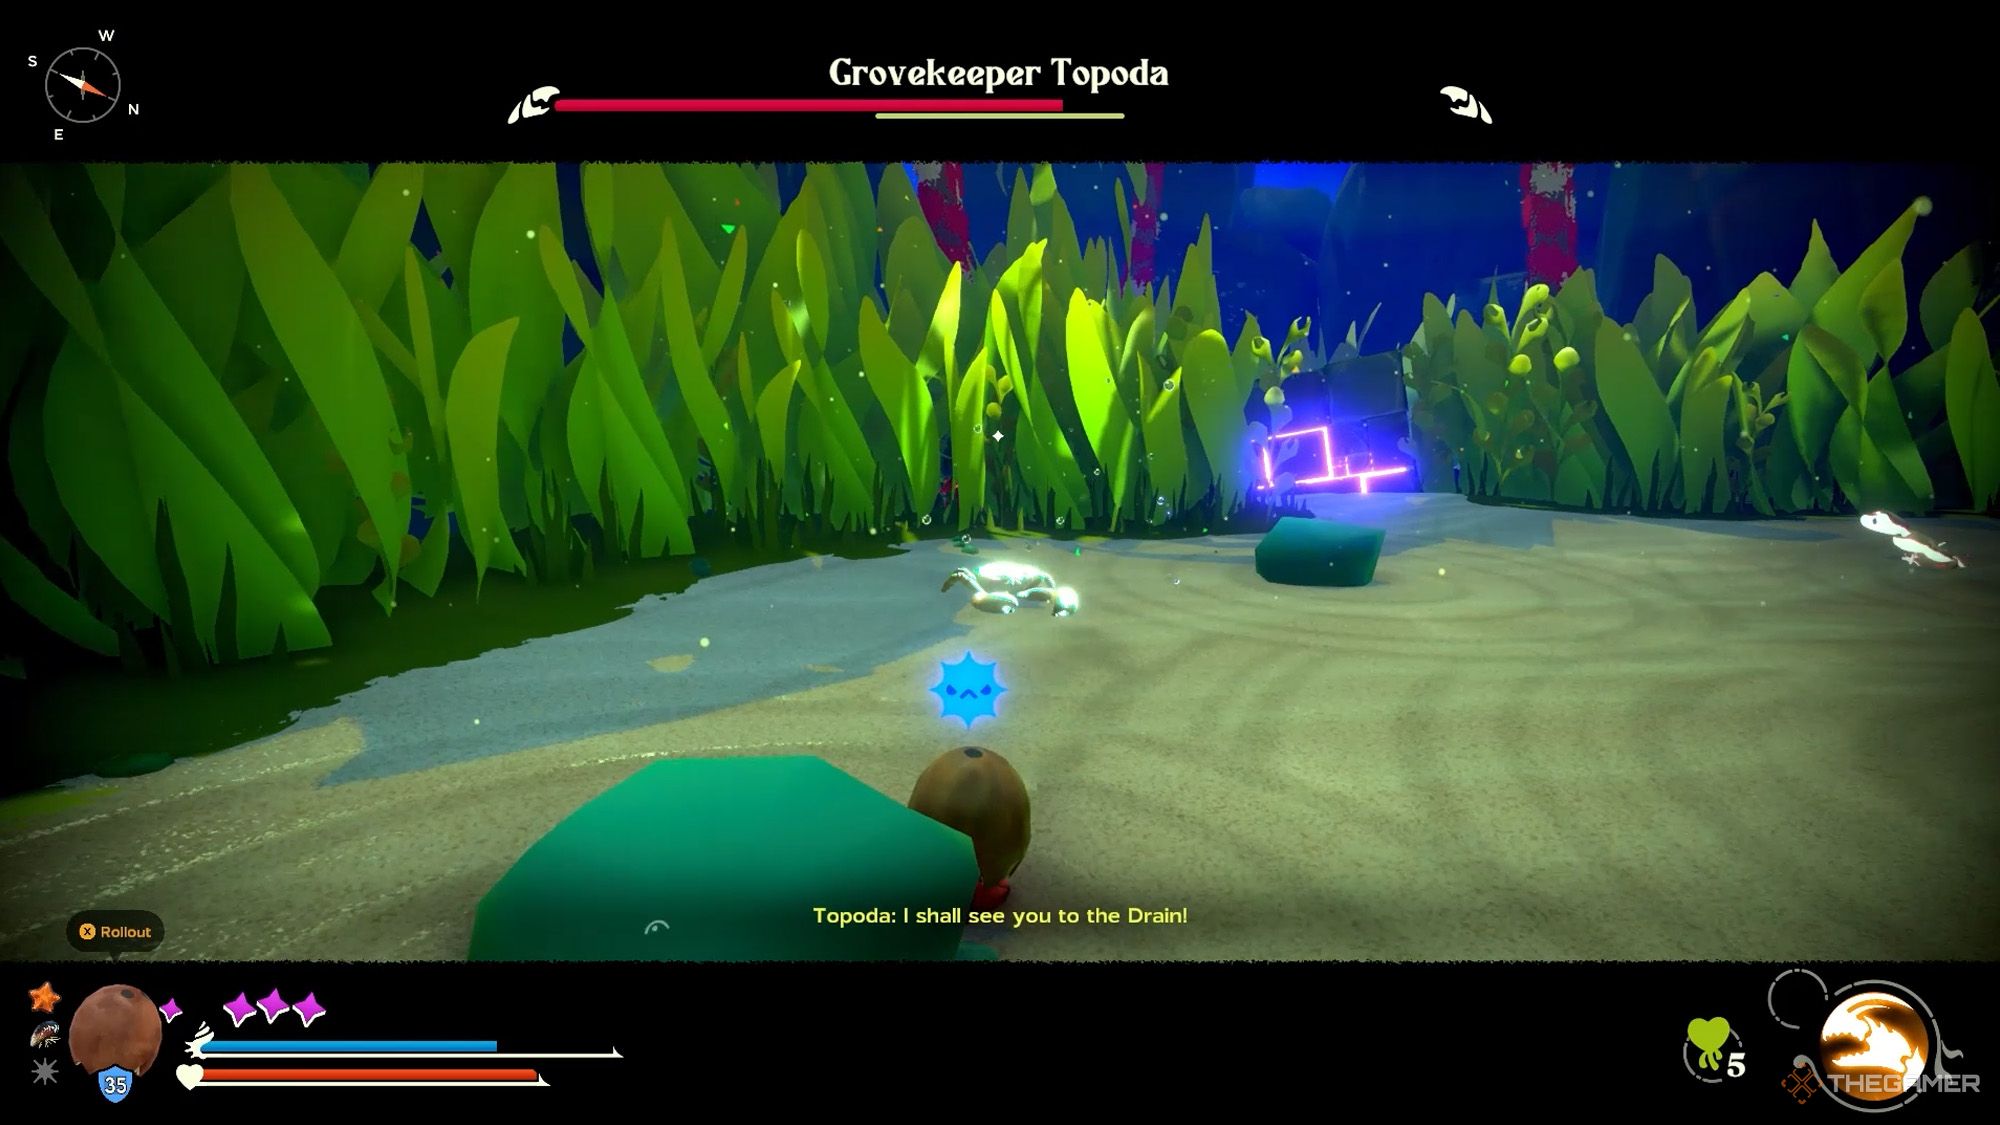 Another Crab's Treasure - Grovekeeper Topoda is planning to use shellbreaking punch